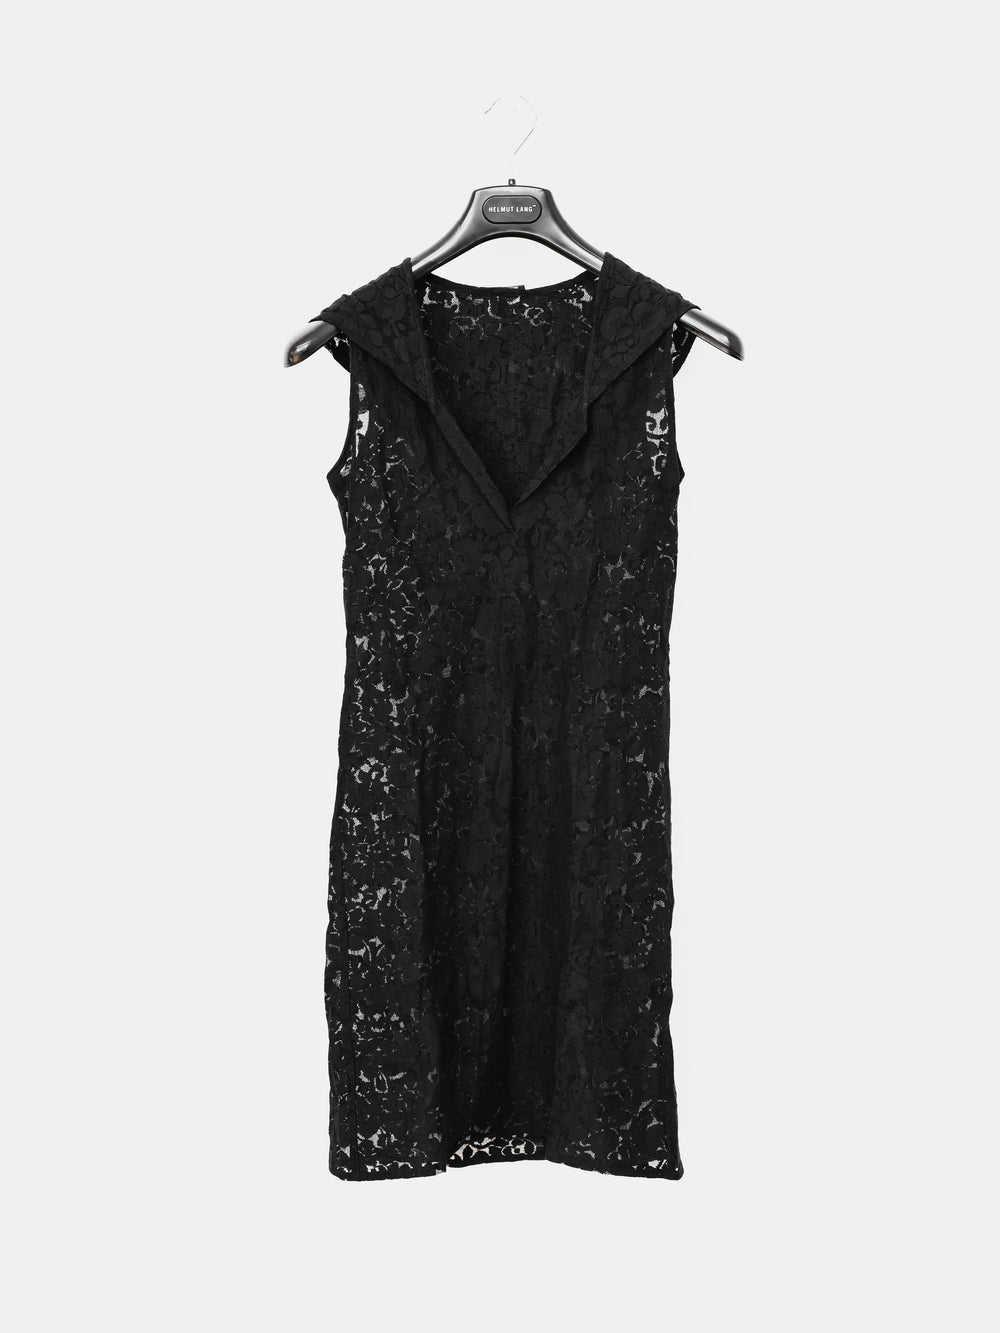 Helmut Lang SS96 Hooded Floral Lace Dress